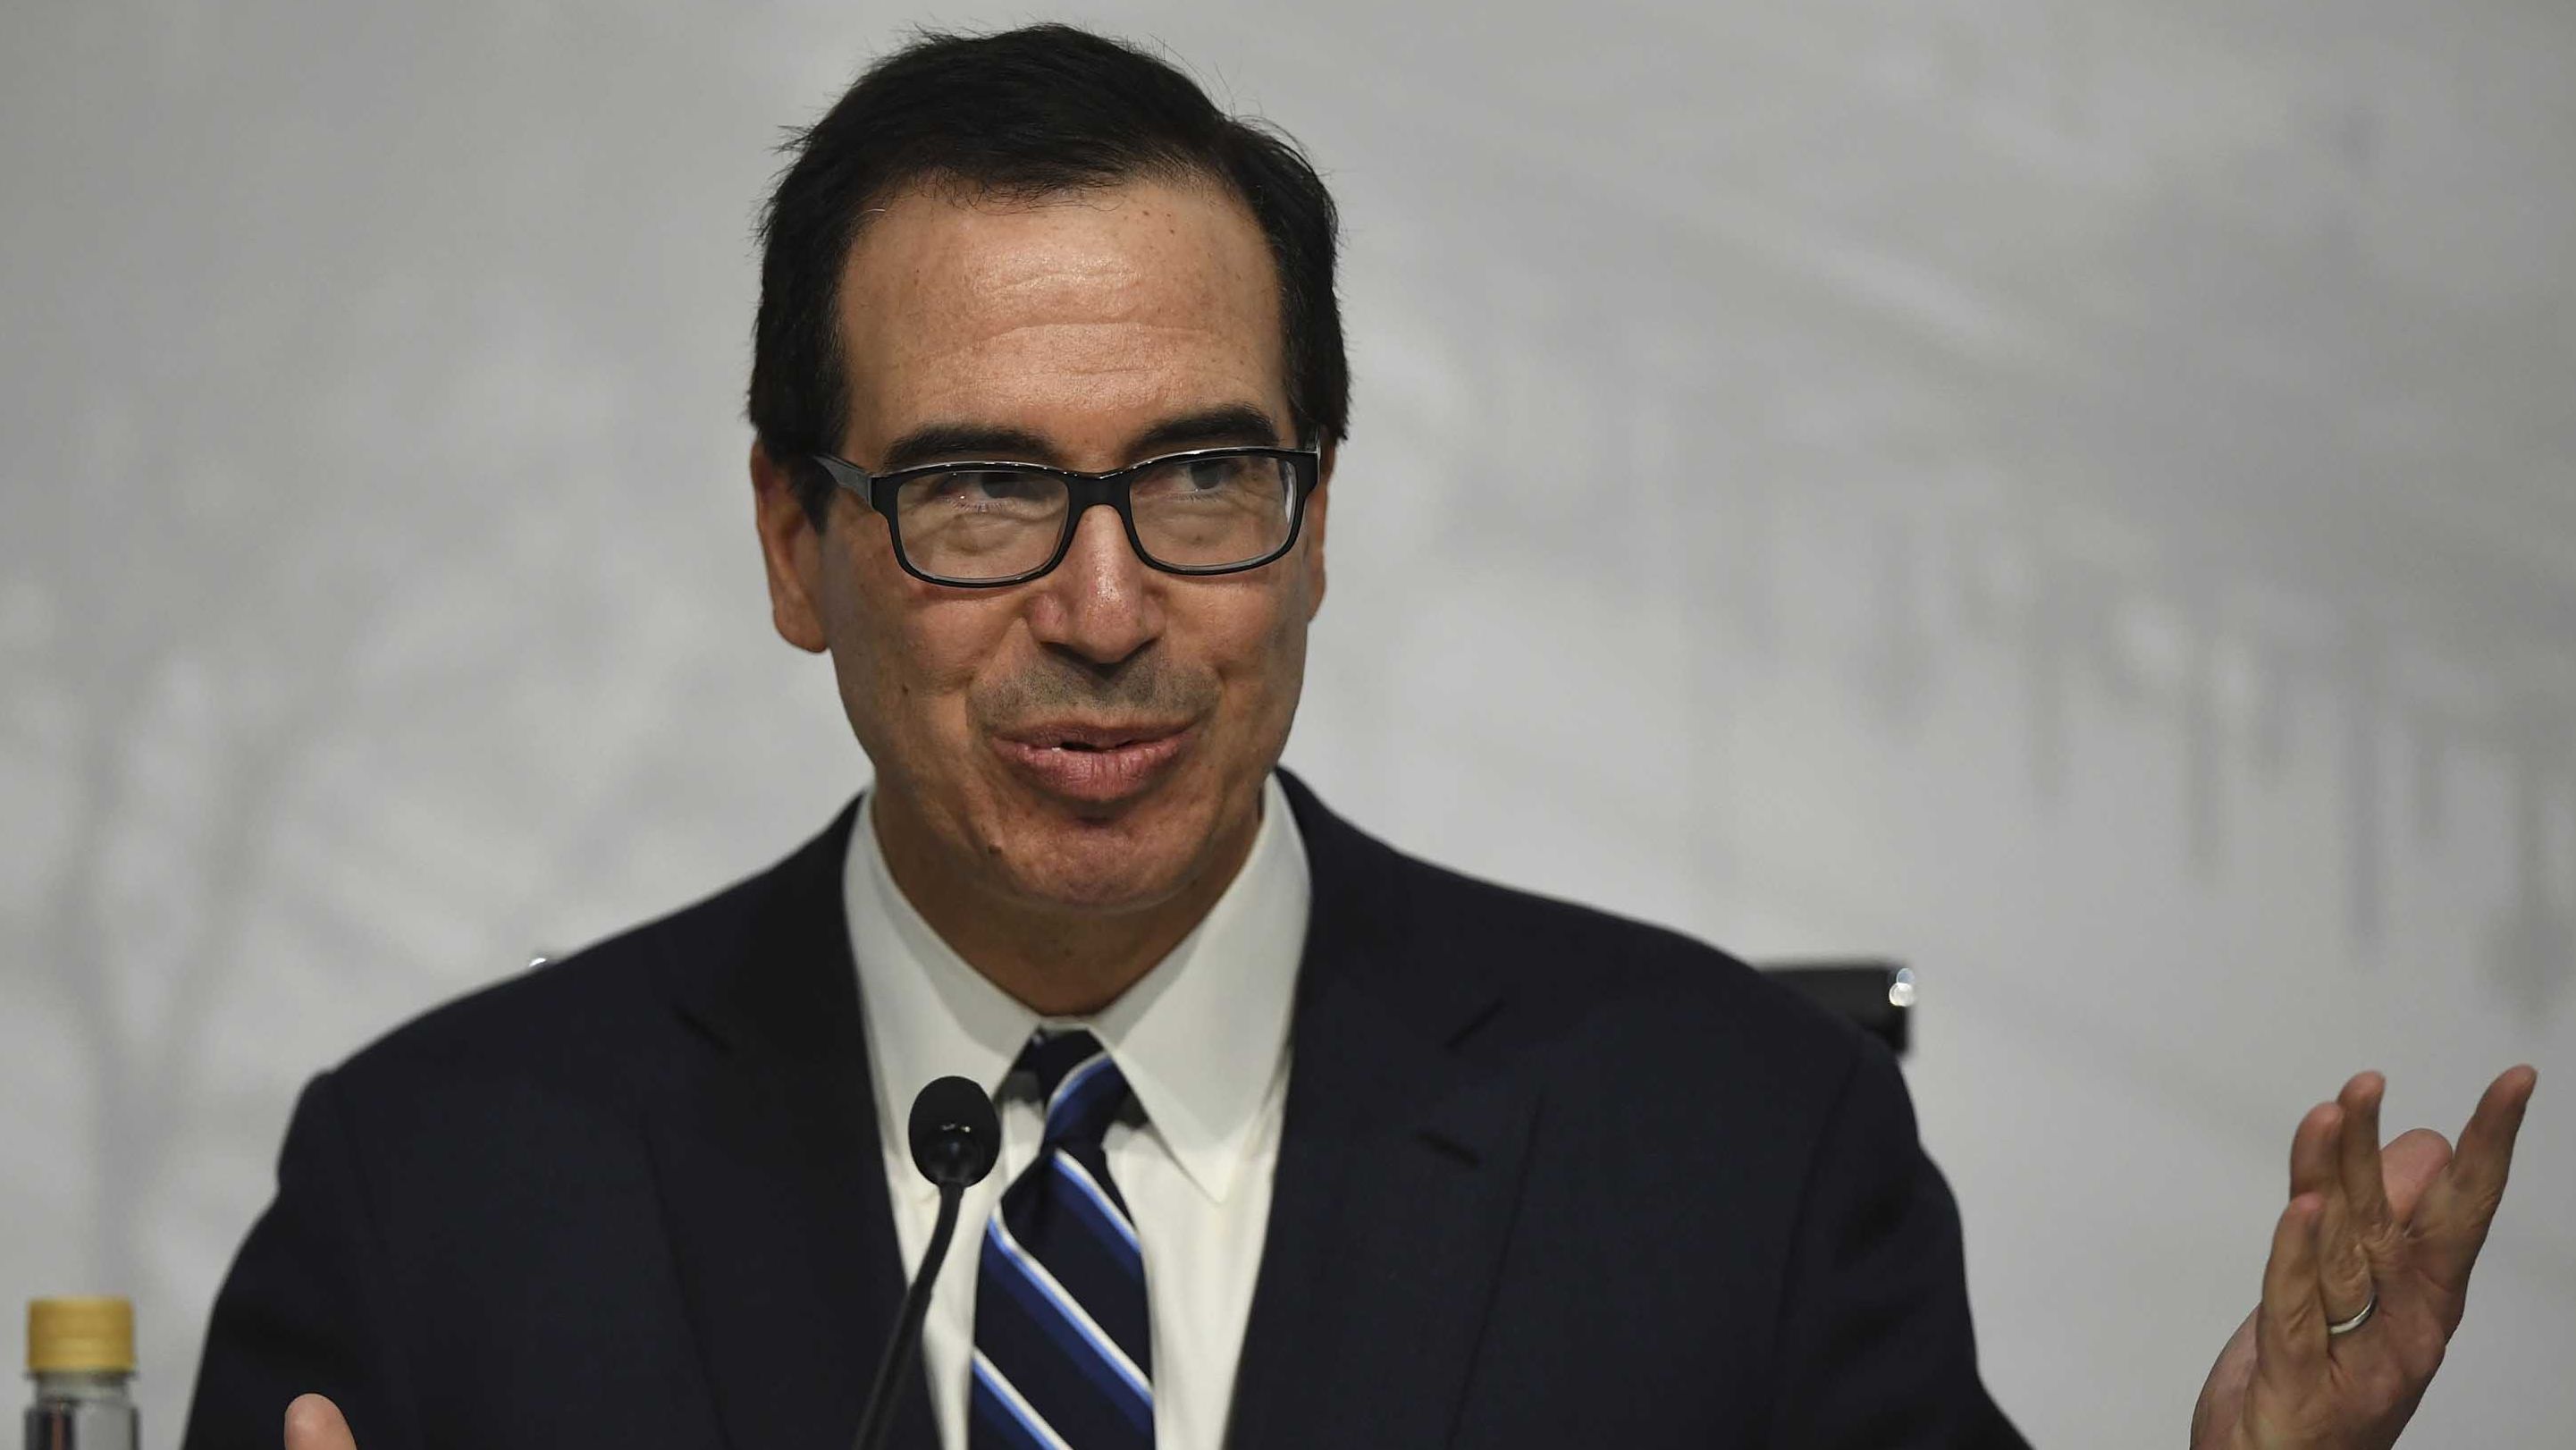 US Secretary of the Treasury Steven Mnuchin, gestures during a press conference in Buenos Aires, on July 22, 2018, at the end of the G20 Finance Ministers and Central Bank Governors meeting. - Group of 20 finance ministers warned on Sunday that "heightened trade and geopolitical tensions" posed risks to global economic growth as two days of meetings came to a close. (Photo by EITAN ABRAMOVICH / AFP)        (Photo credit should read EITAN ABRAMOVICH/AFP/Getty Images)